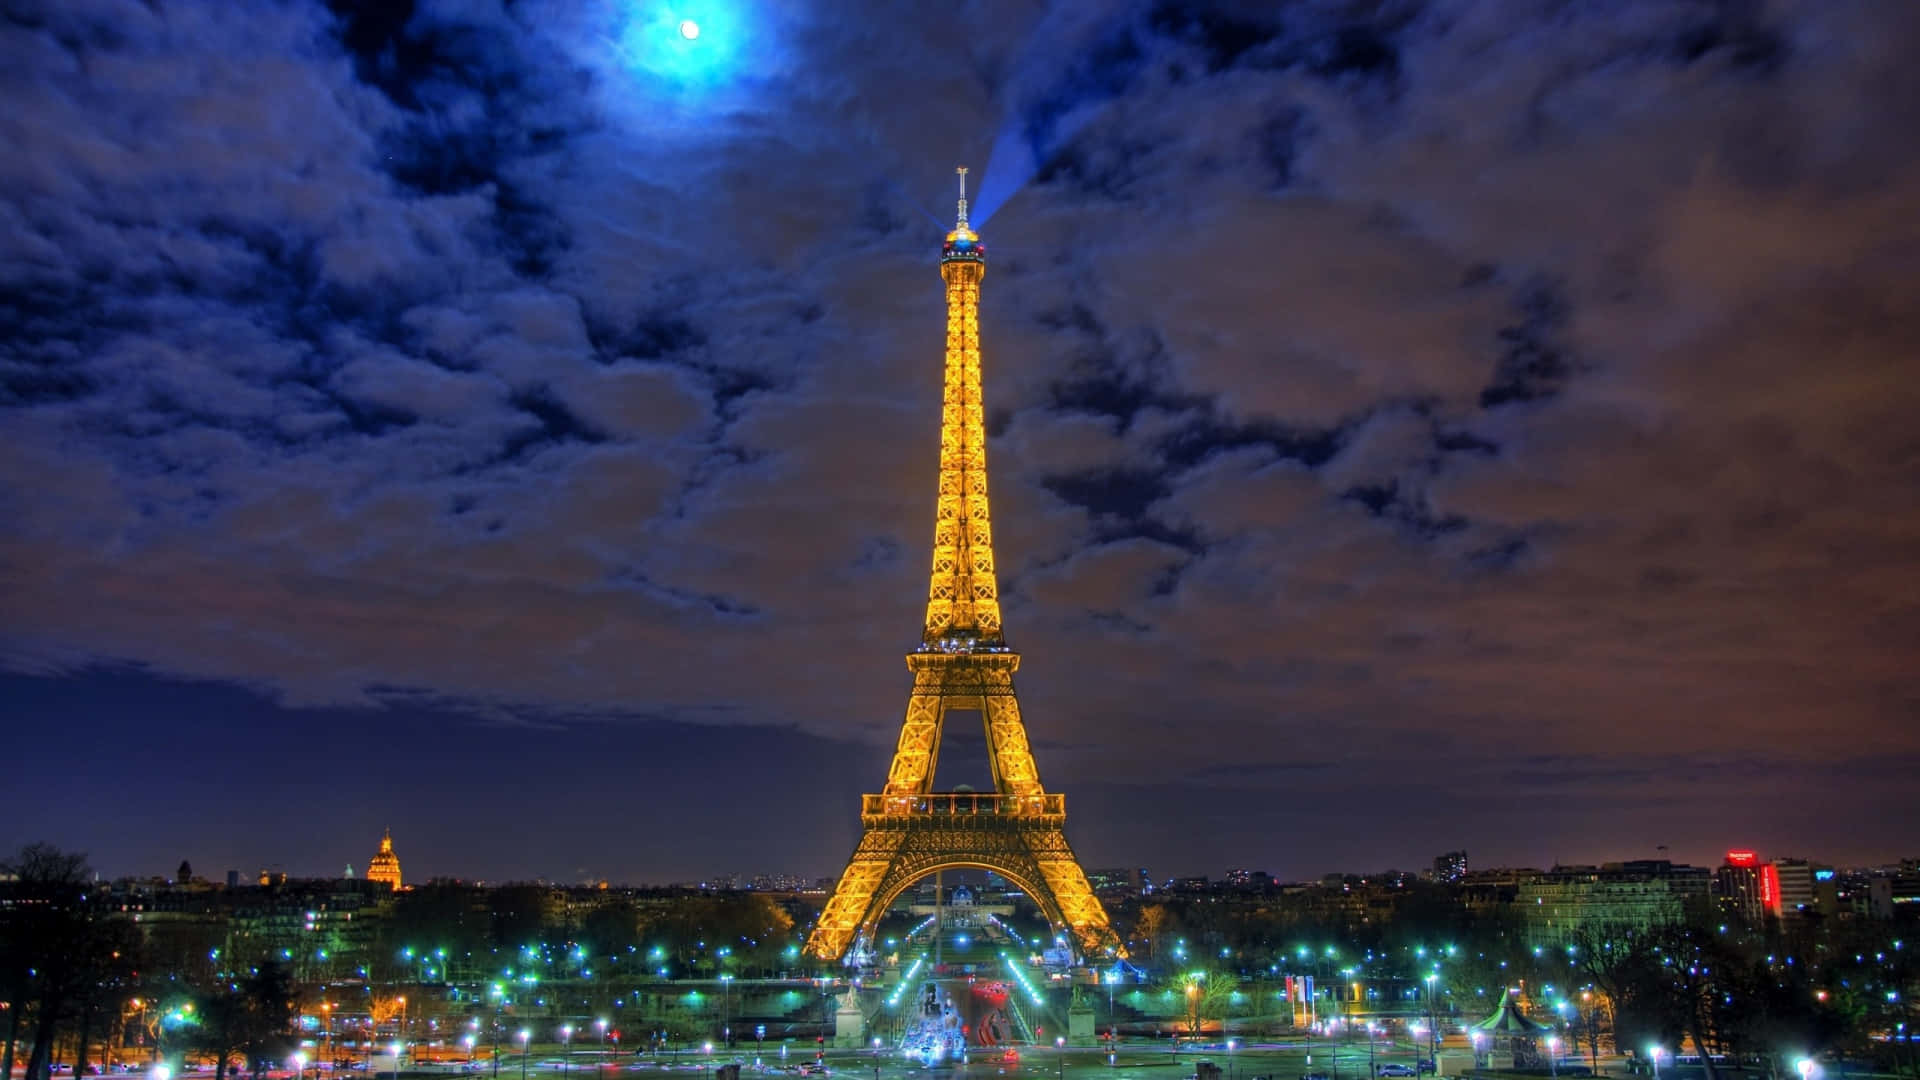 Witness the beauty of the Eiffel Tower at night